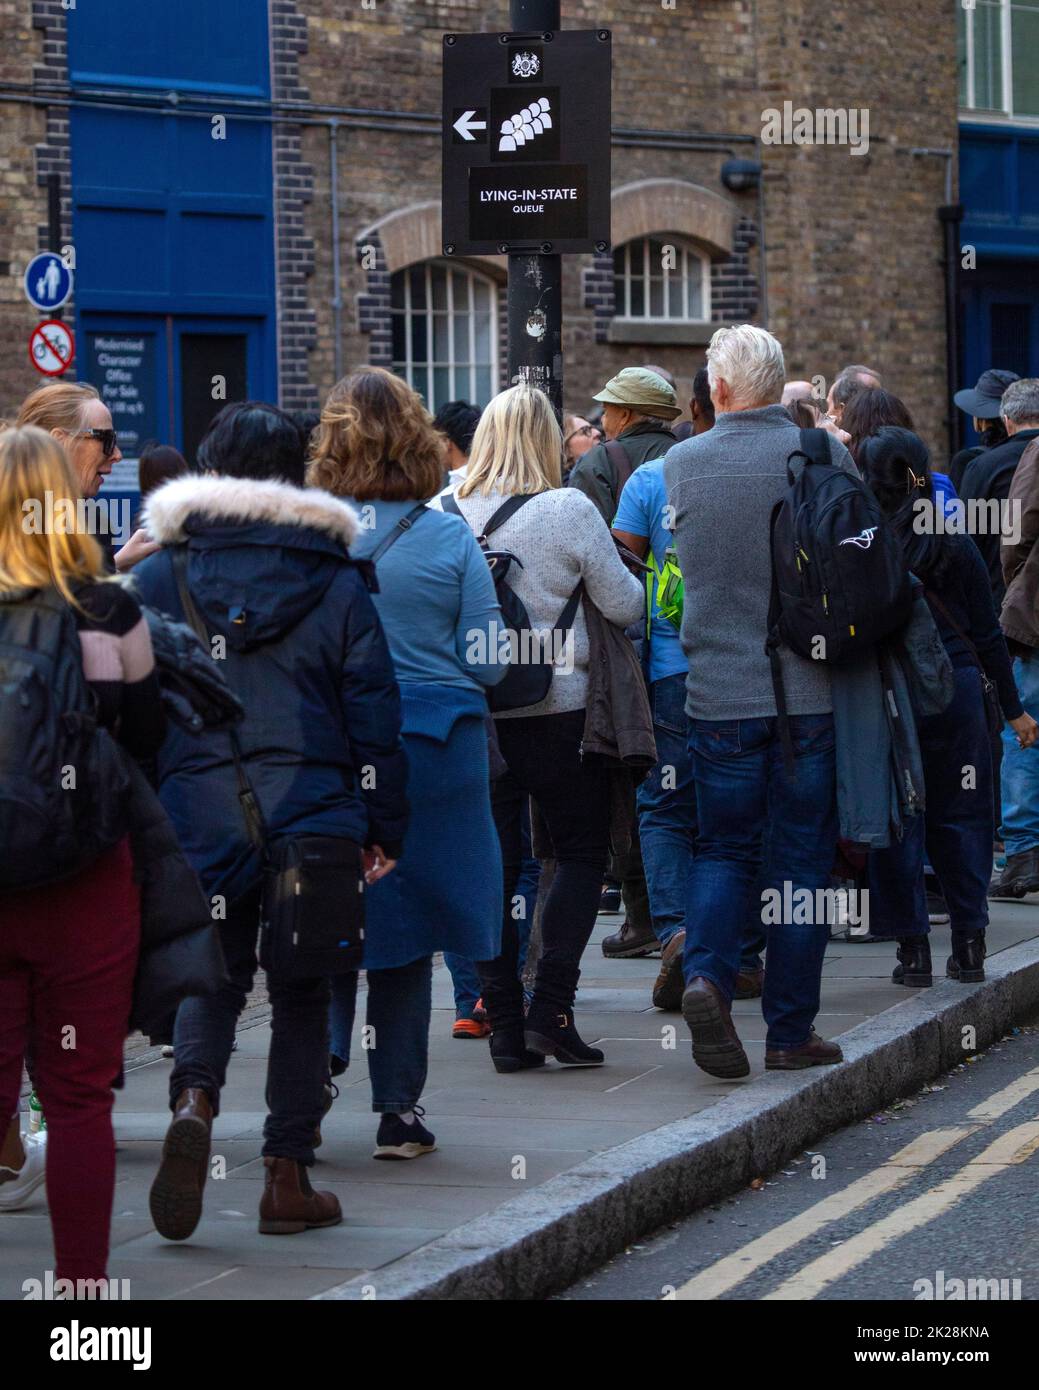 London, UK - September 17th 2022: The Queue on Bermondsey Wall West in London, to see the late Queen Elizabeth II Lying-in-State. Stock Photo